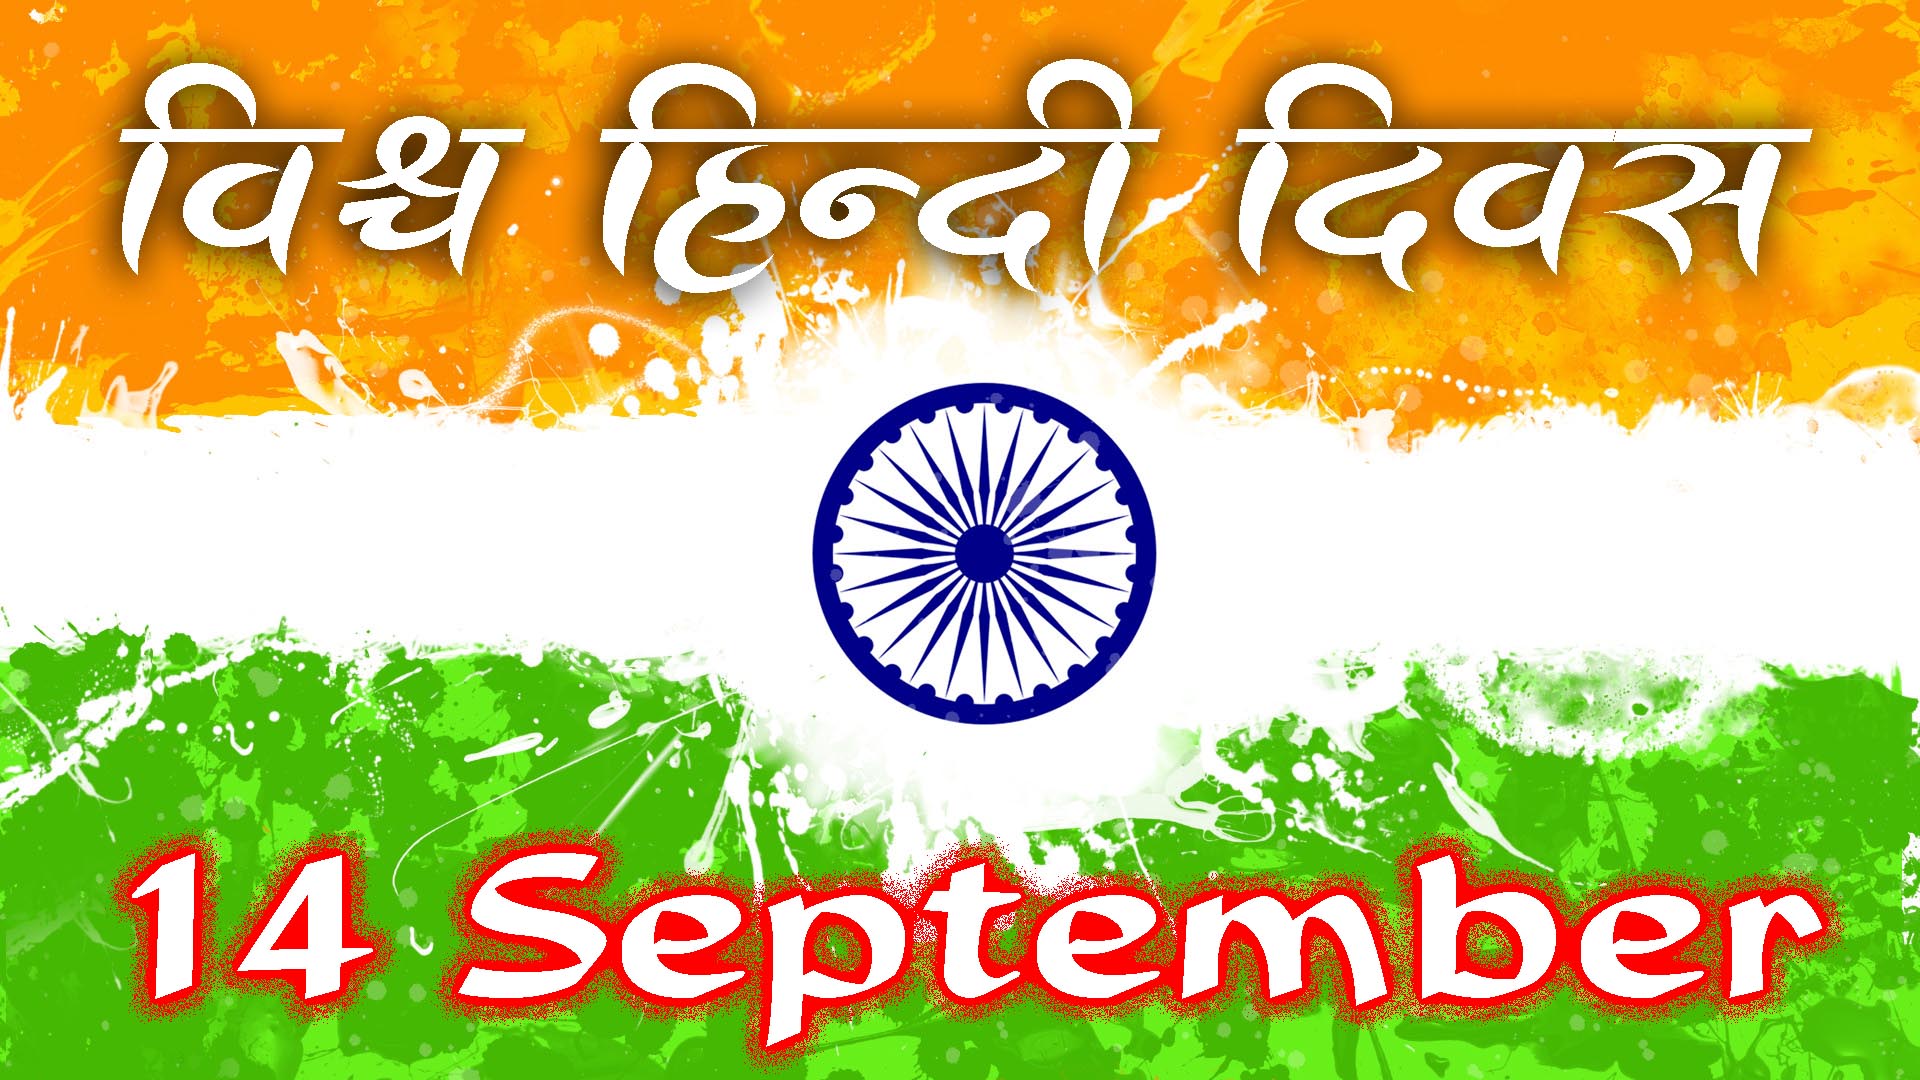 Hindi Diwas Quotes, Slogans & Poems to Celebrate the Day